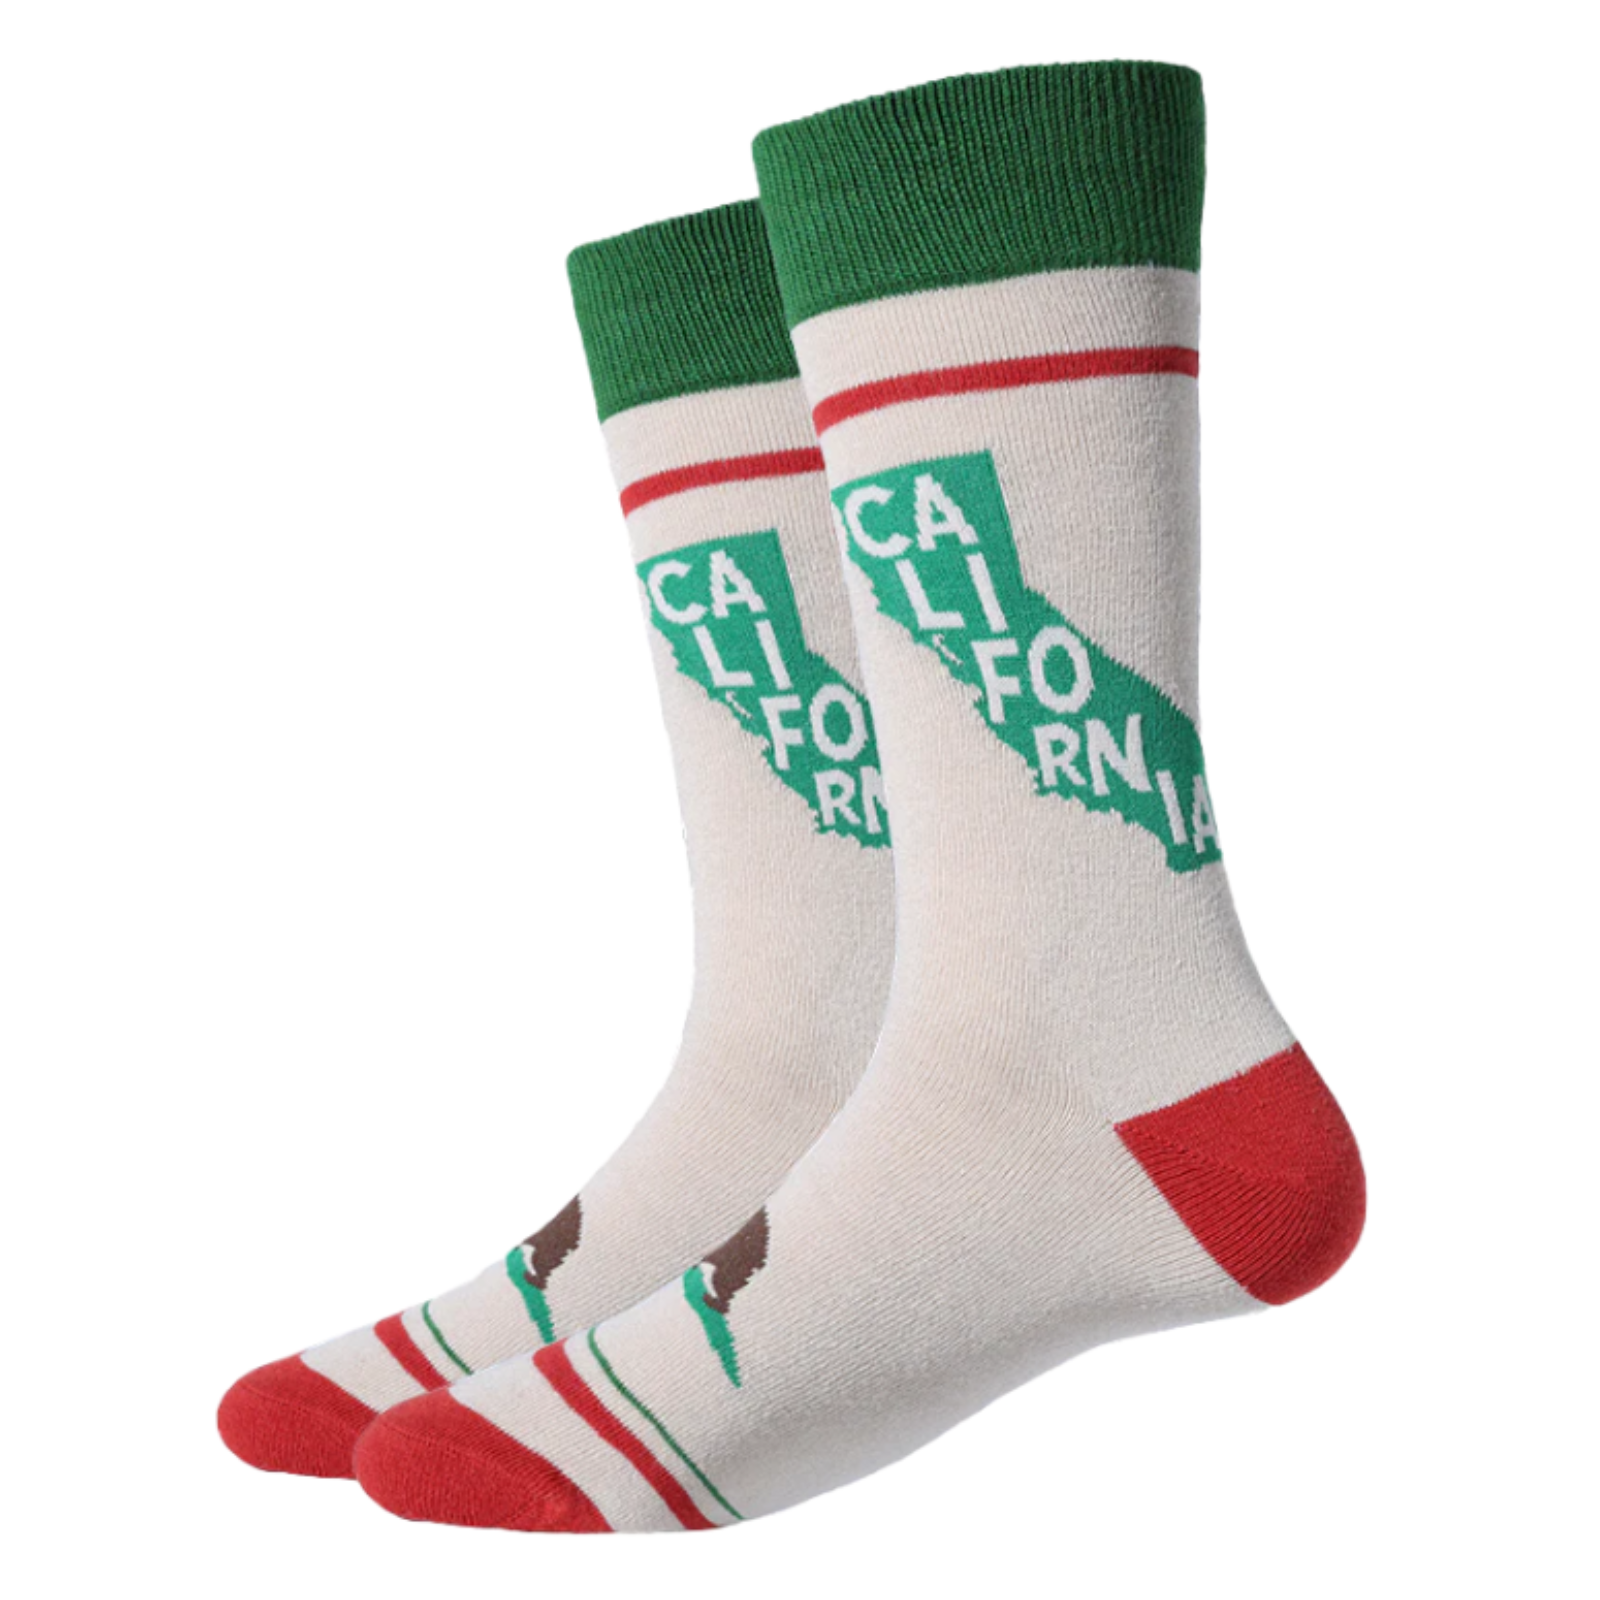 Sock Harbor California Silhouette men's crew sock featuring beige sock with green cuff and red toes with green silhouette of California and the letters "California" inside the silhouette. The Bear from the California state flat is on the top of the foot. Sock shown on display feet. 